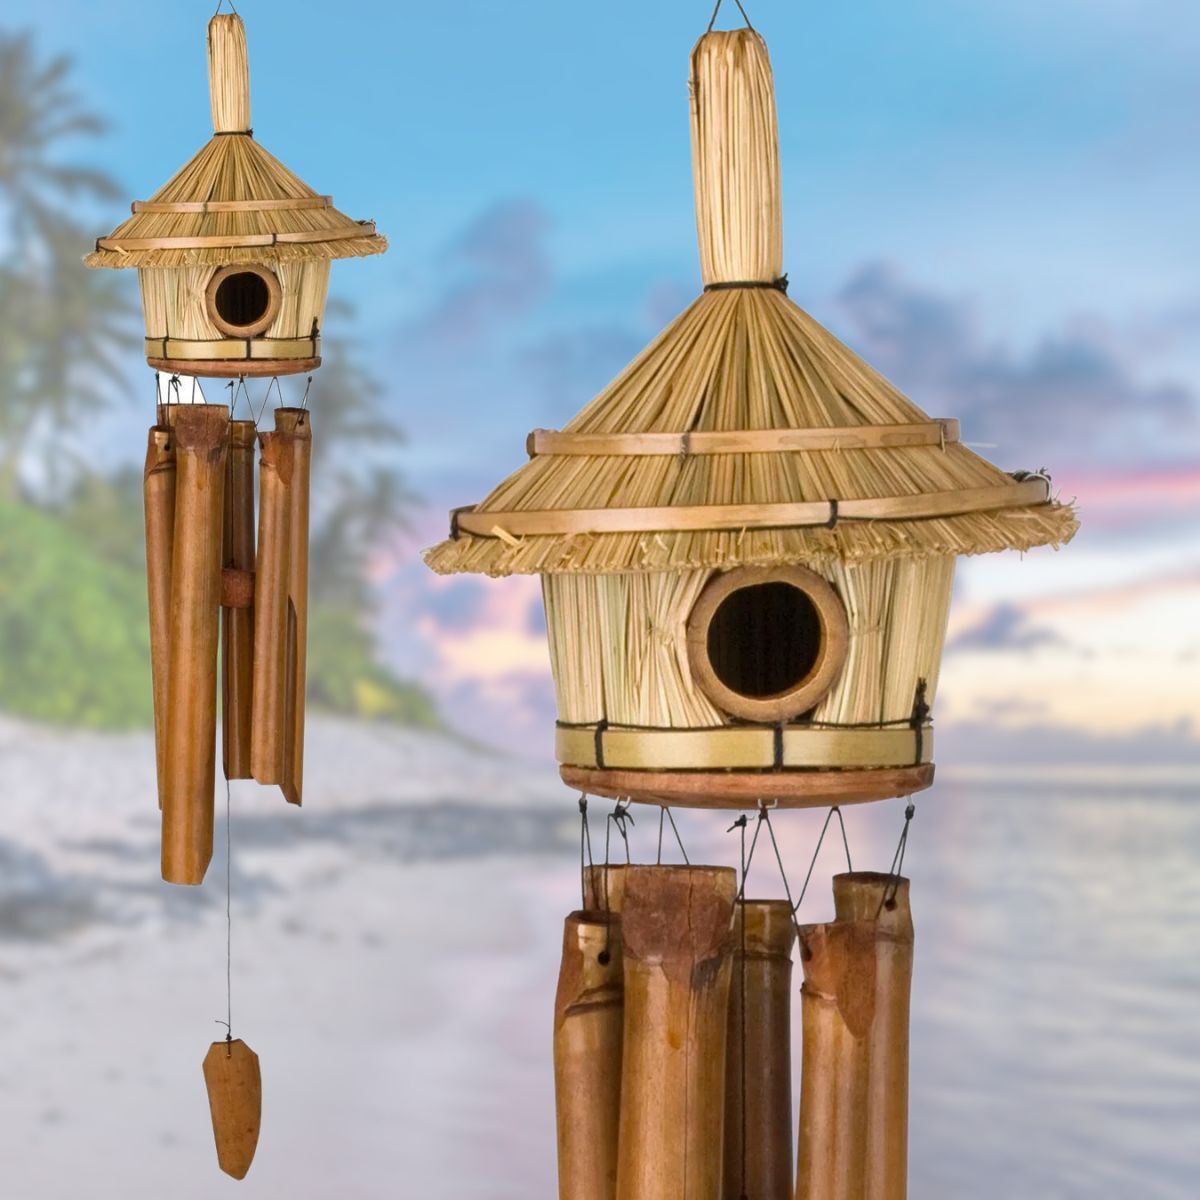 Woodstock Percussion Thatched Roof Birdhouse Bamboo Wind Chime